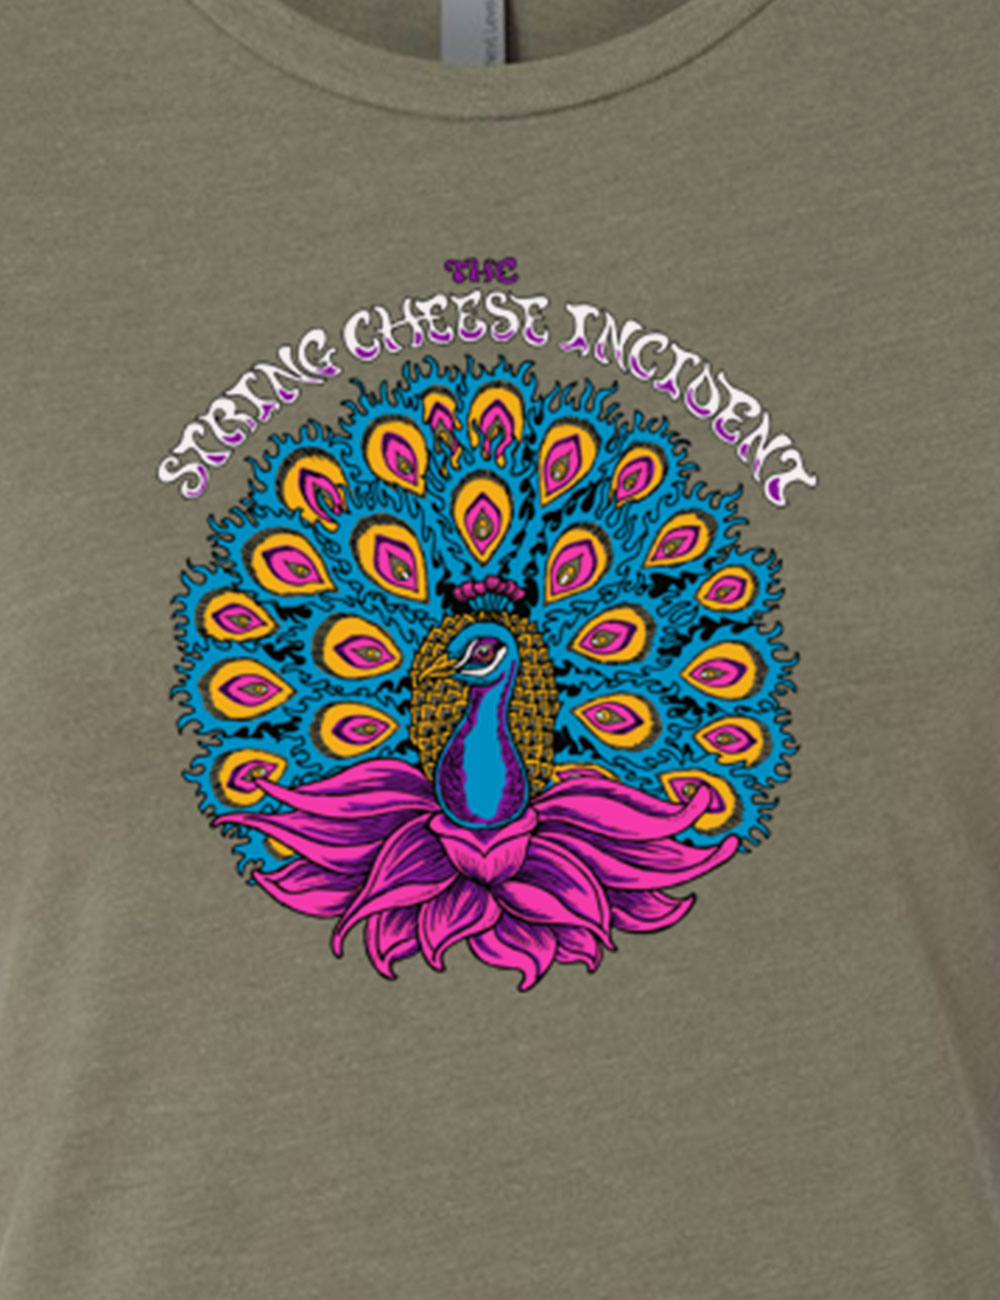 The String Cheese Incident - T-shirts- Women - Peacock Olive Closeup Detail